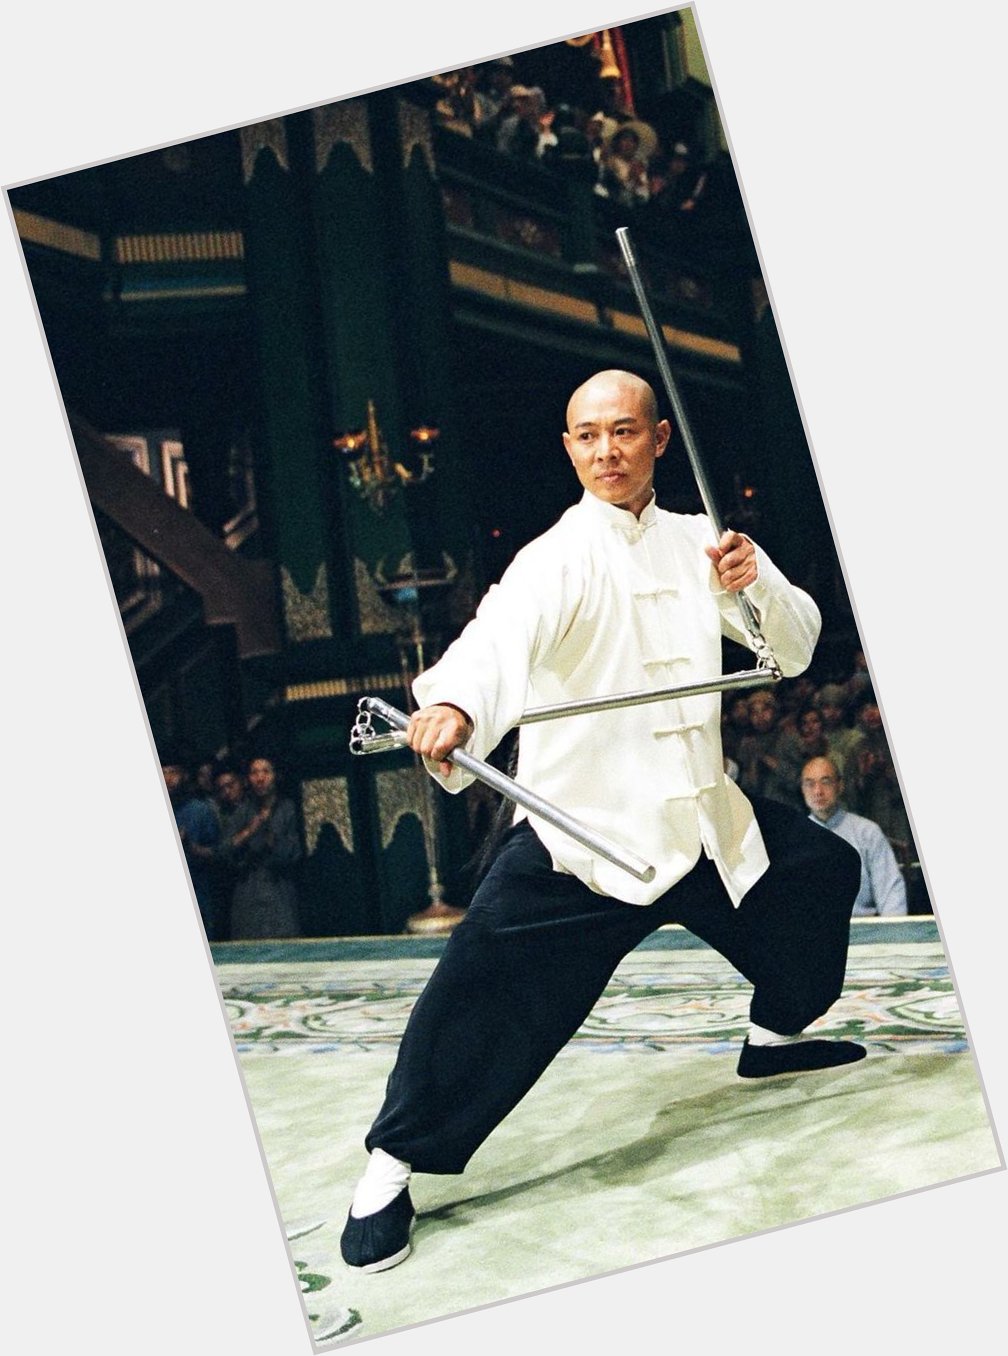 This man and others made our childhood fun. Happy 57th birthday Jet Li. 